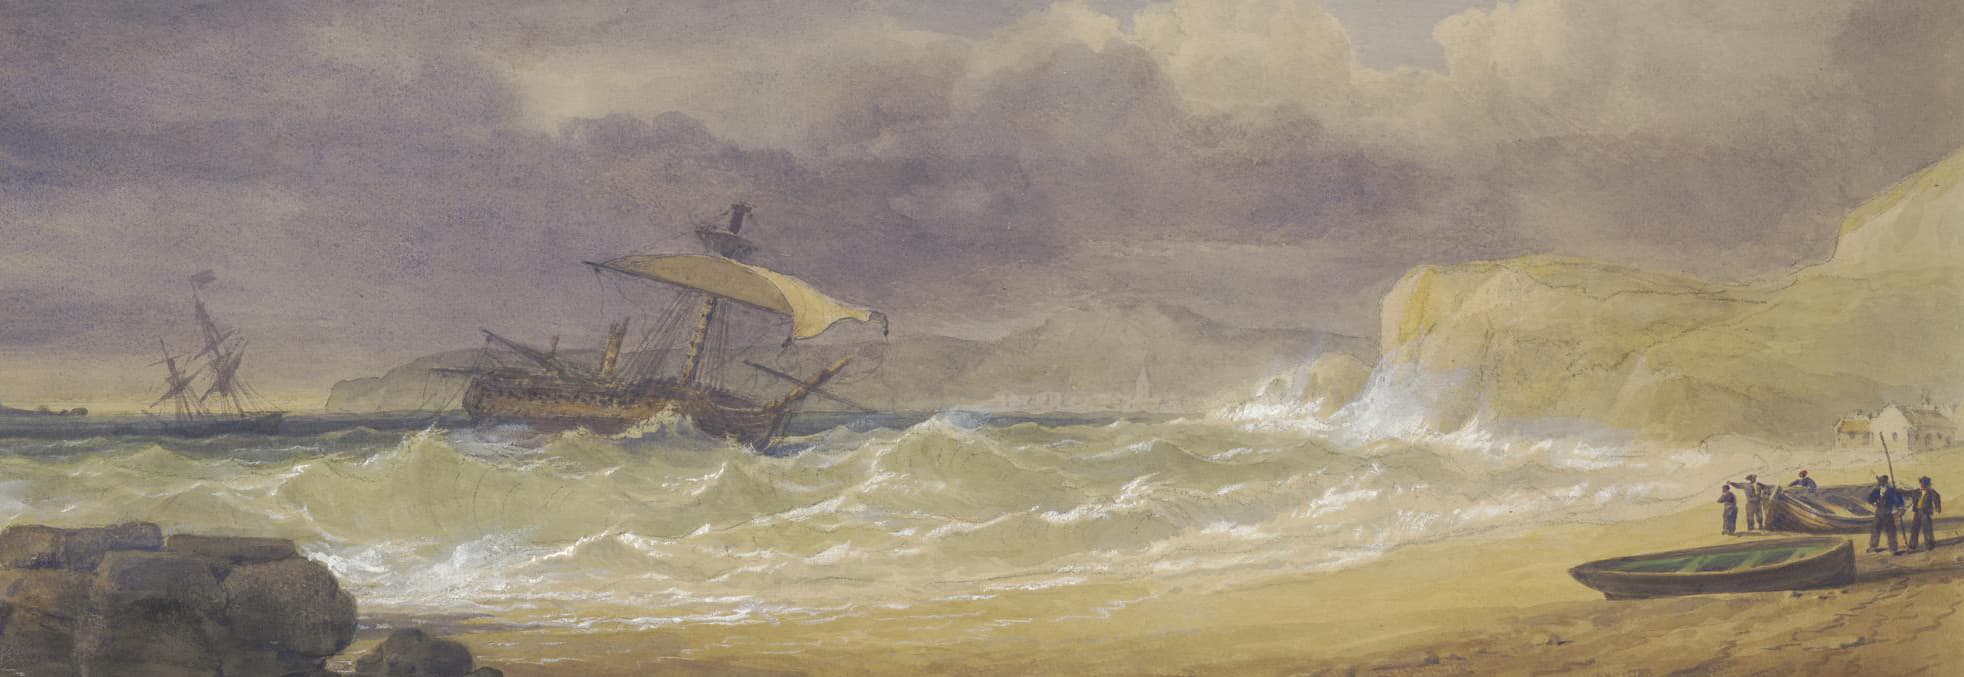 A painting depicting HMS Anson having run aground during a storm. On shore, five men ready a small boat.